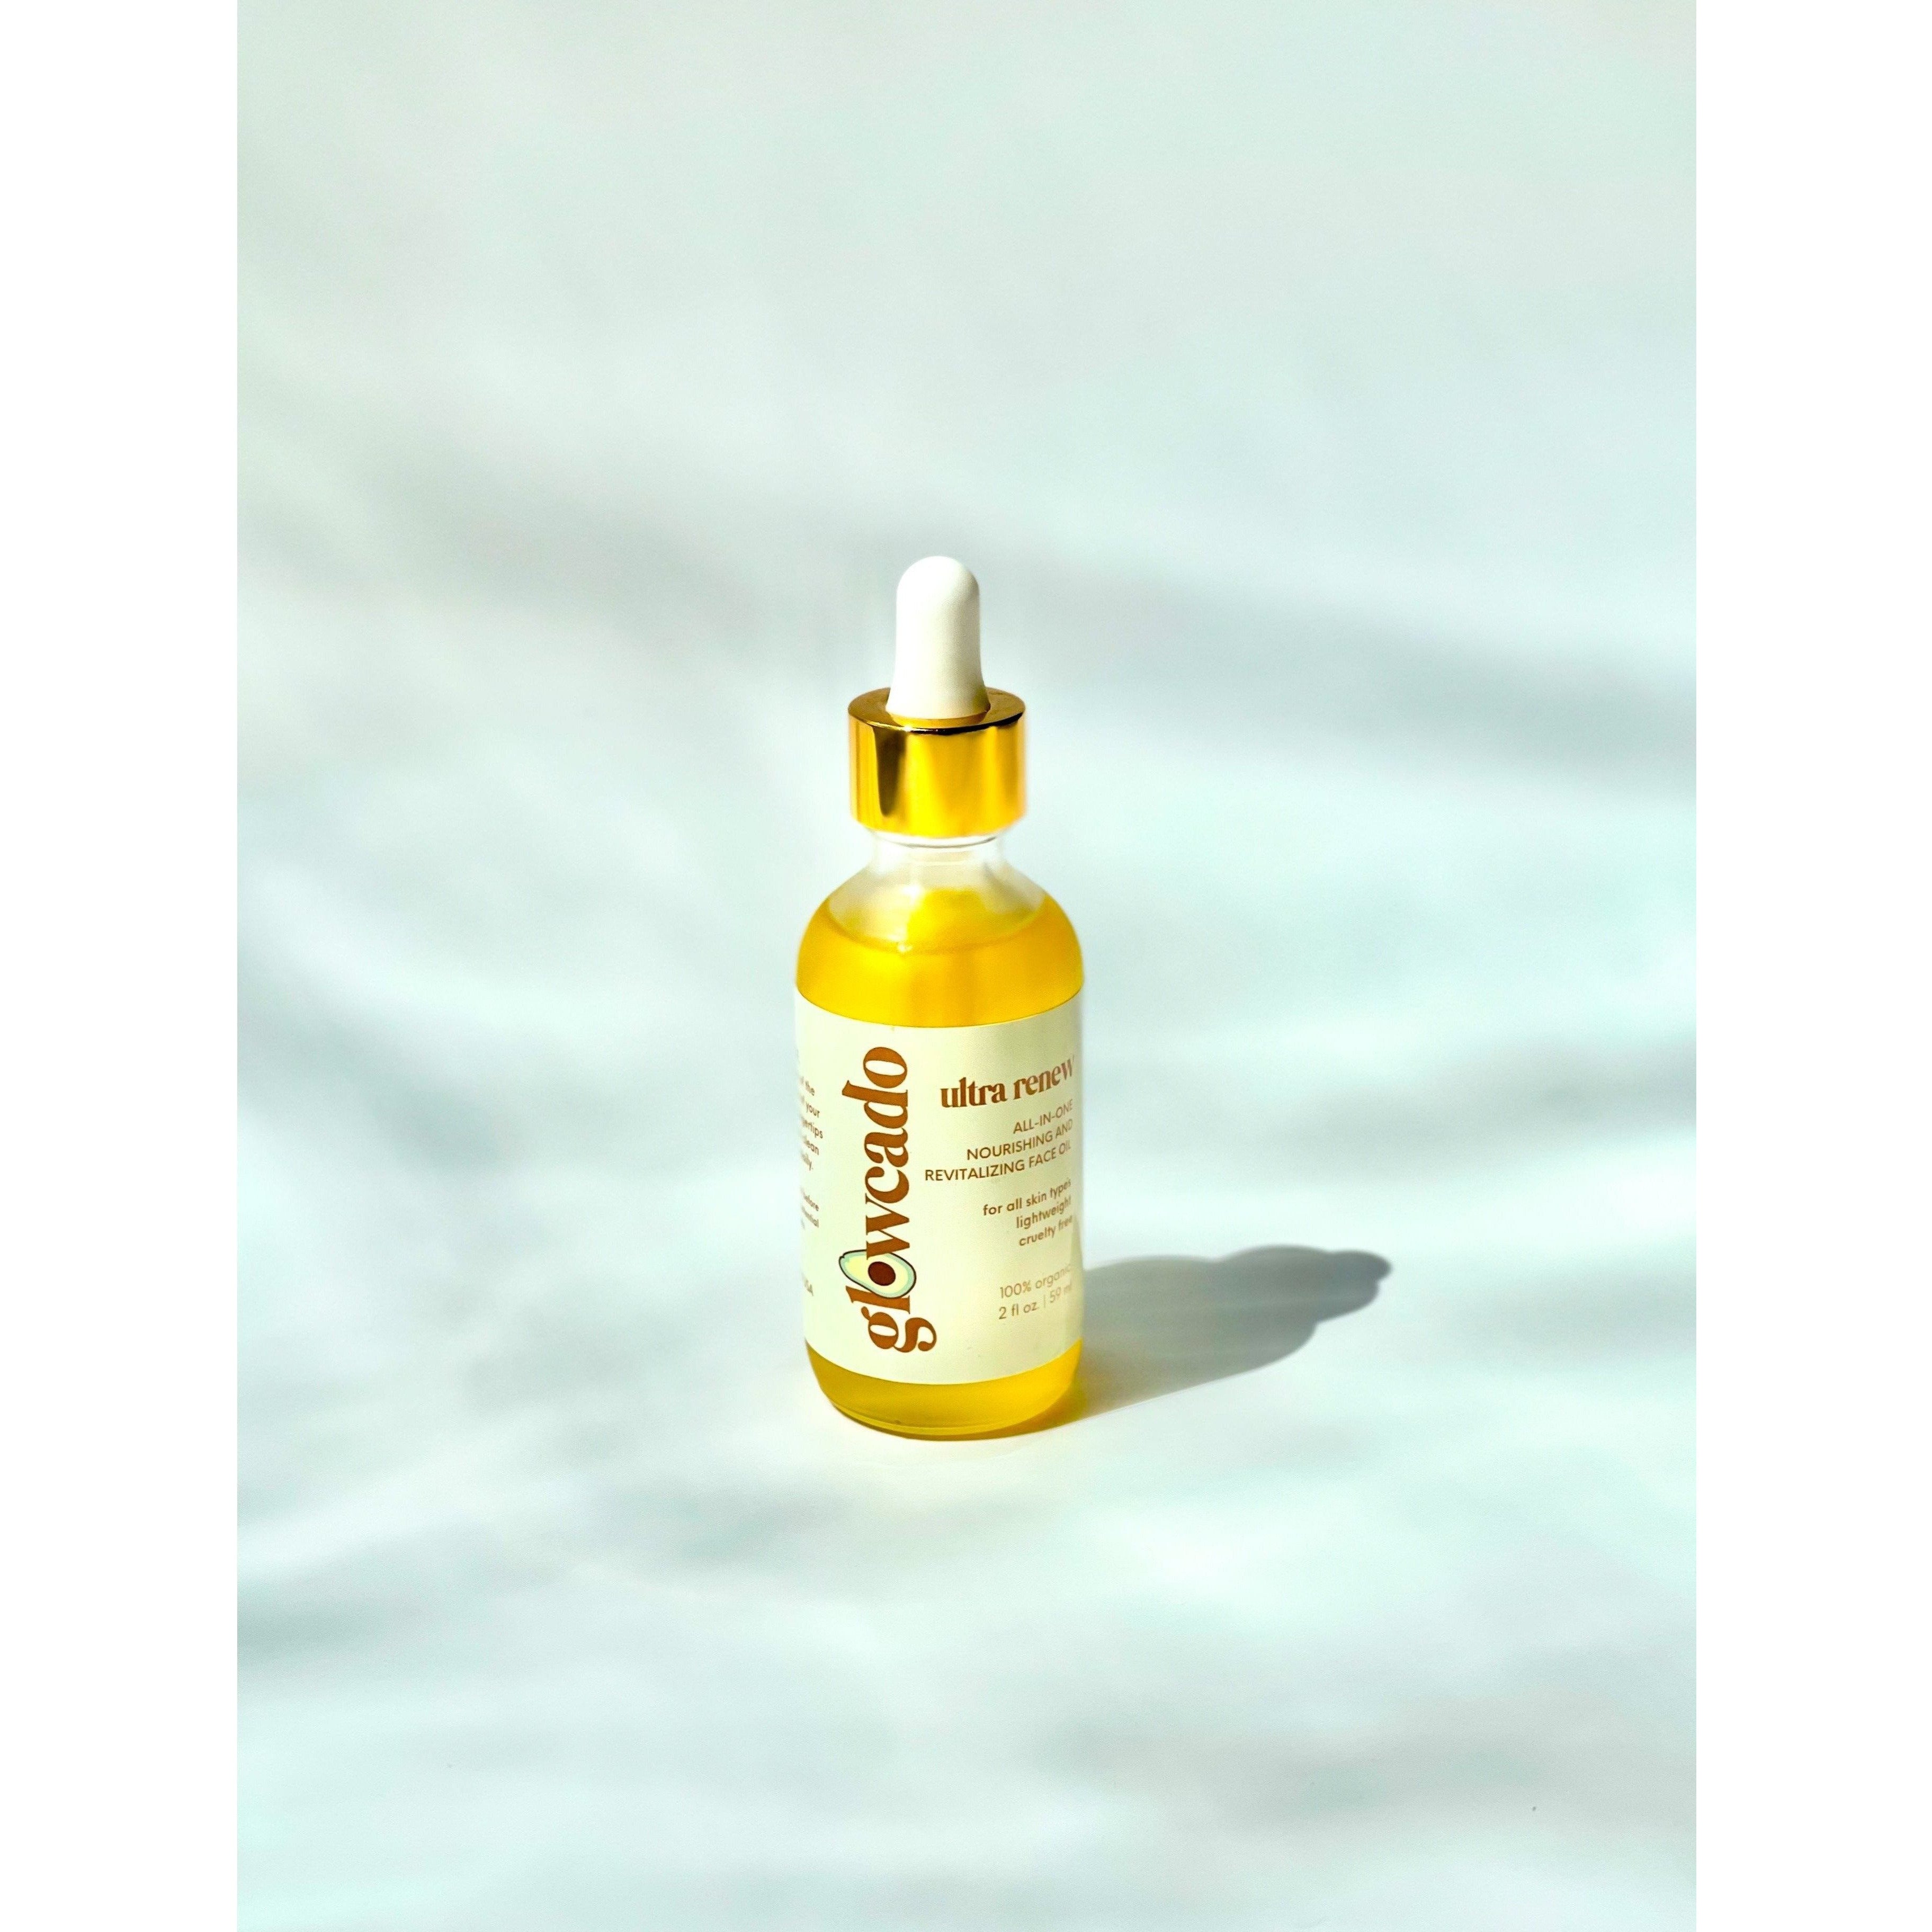 ultra renew all-in-one nourishing face oil